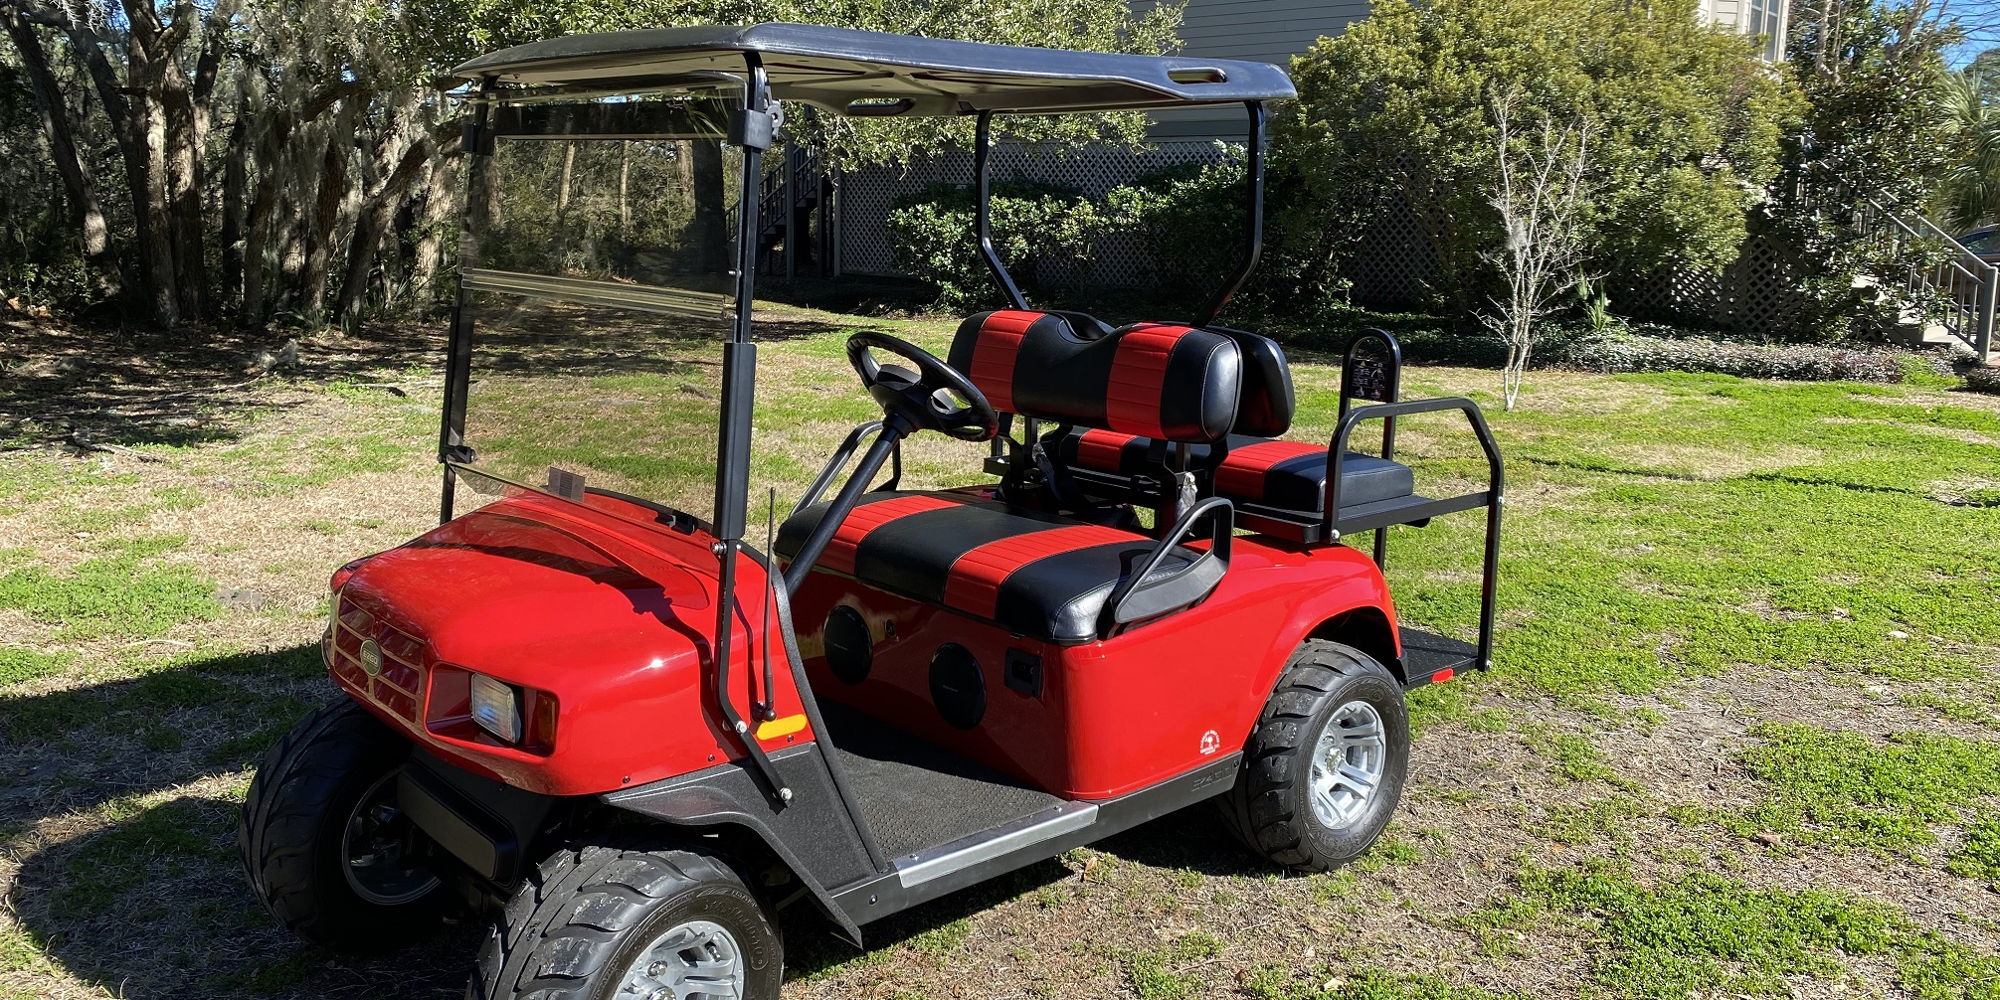 Second Annual Liquid Box and Charleston Seafarers Golf Cart Auction promotional image